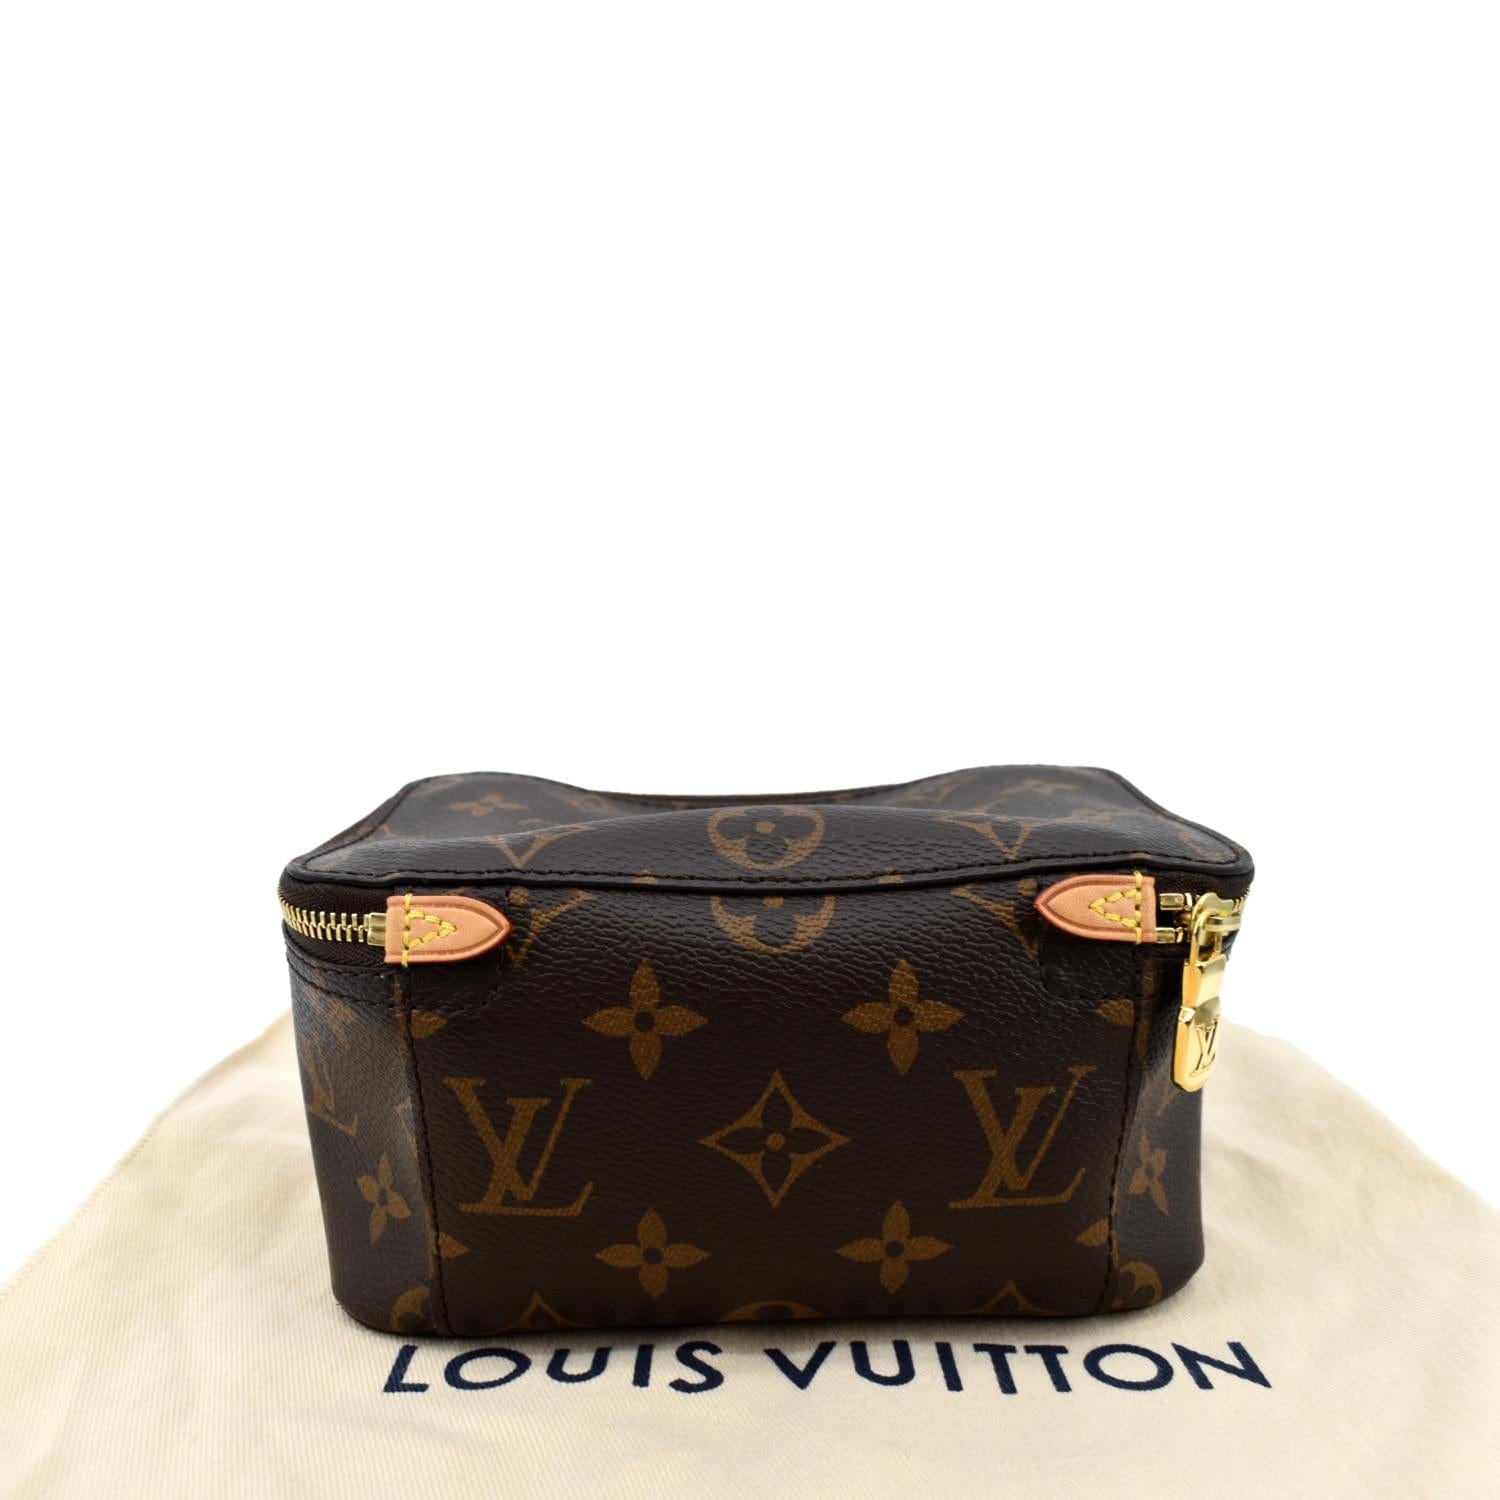 Shop Louis Vuitton 2021-22FW Packing cube pm (M44697) by SkyNS